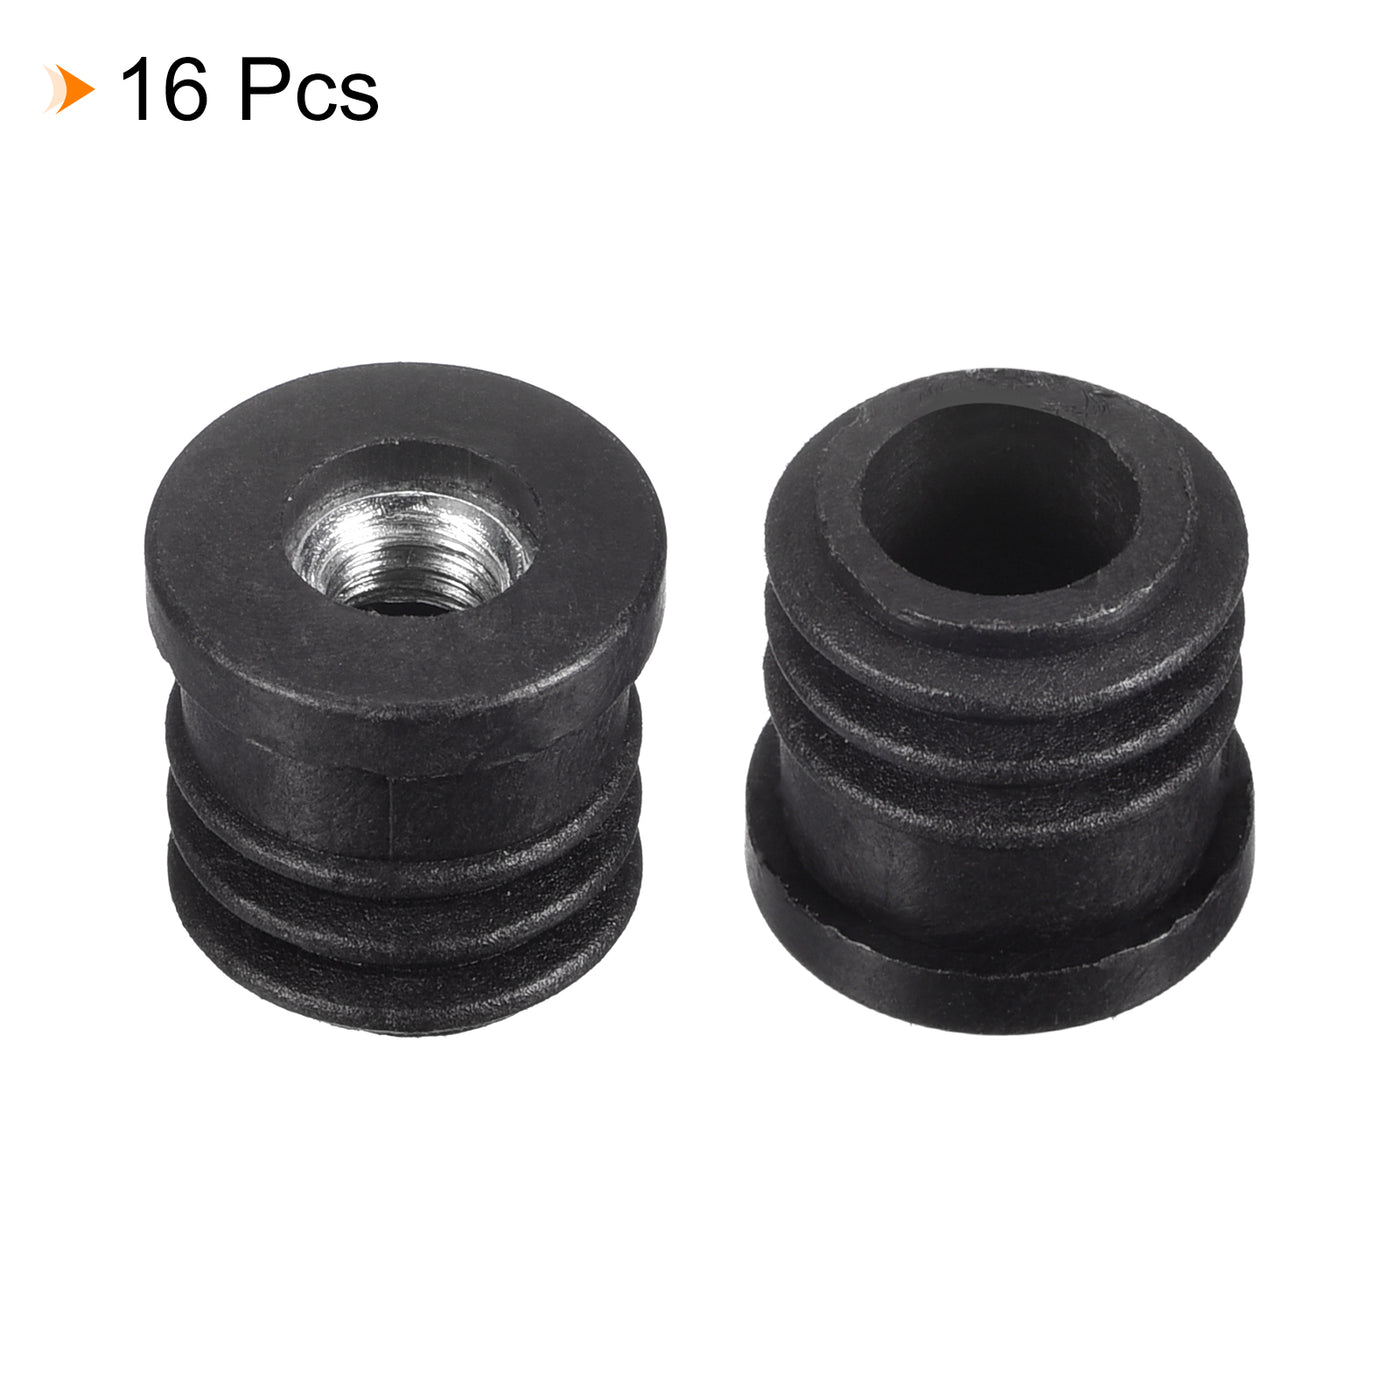 uxcell Uxcell 16Pcs 16mm/0.63" Caster Insert with Thread, Round M6 Thread for Furniture